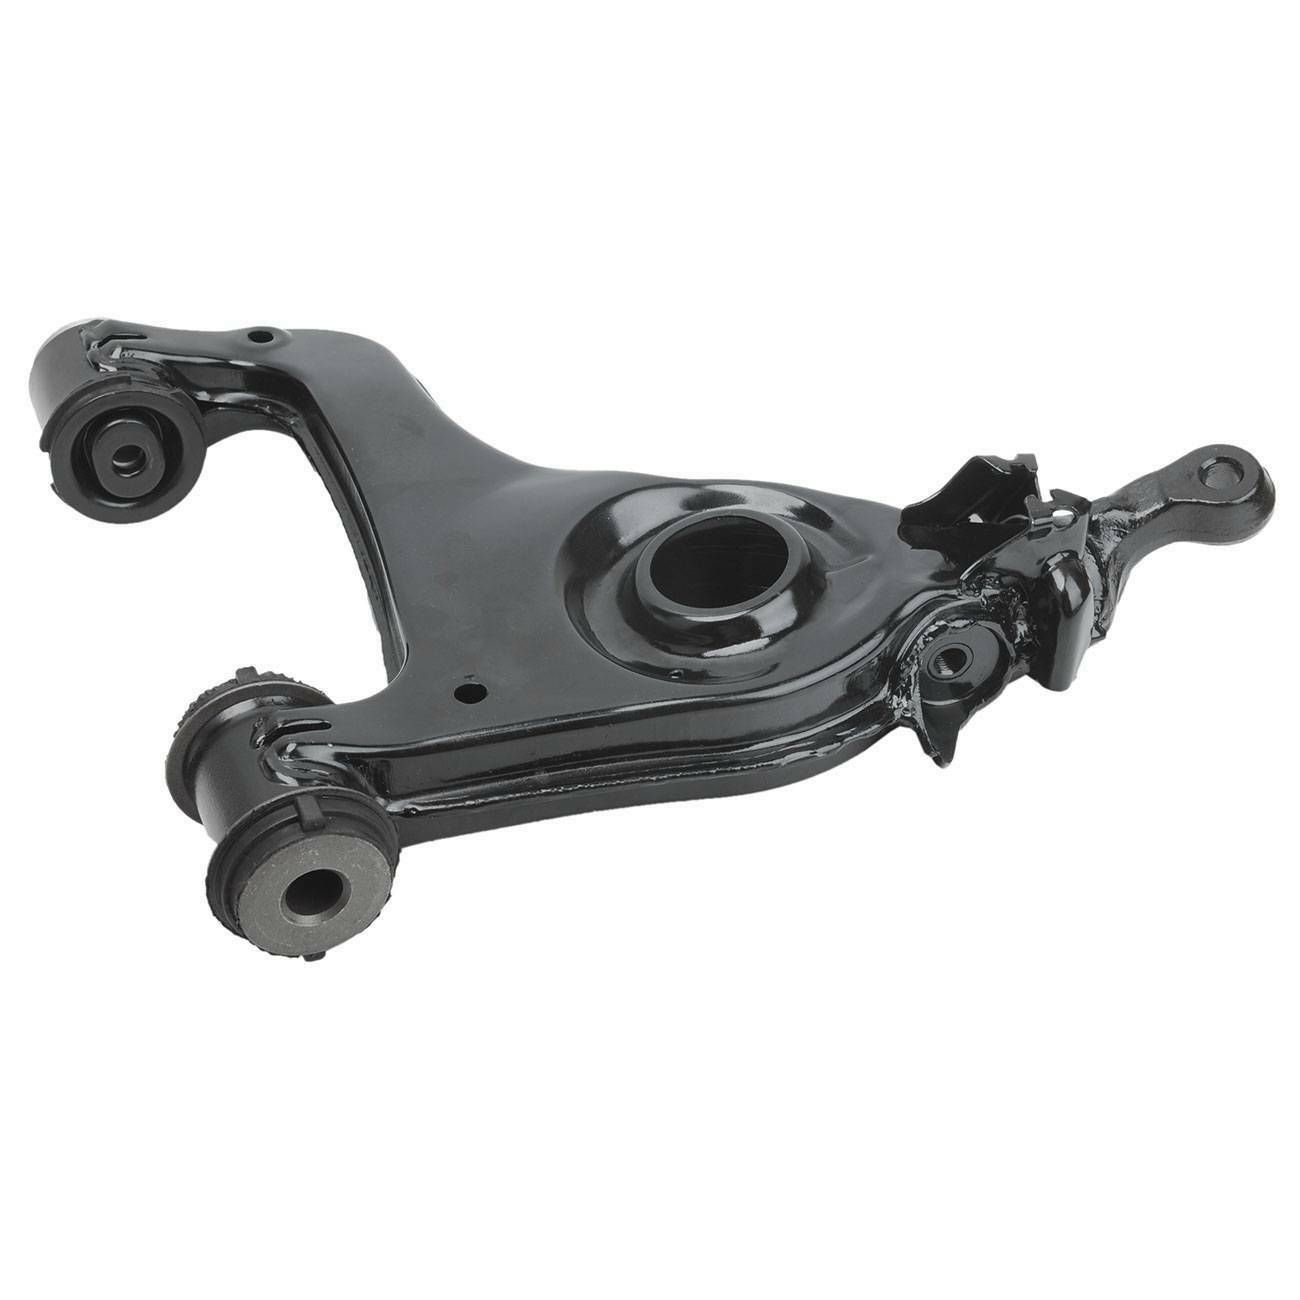 Lower Front Right Control Arm for Mercedes W210 S210 E200 E320 2103307707 German Made